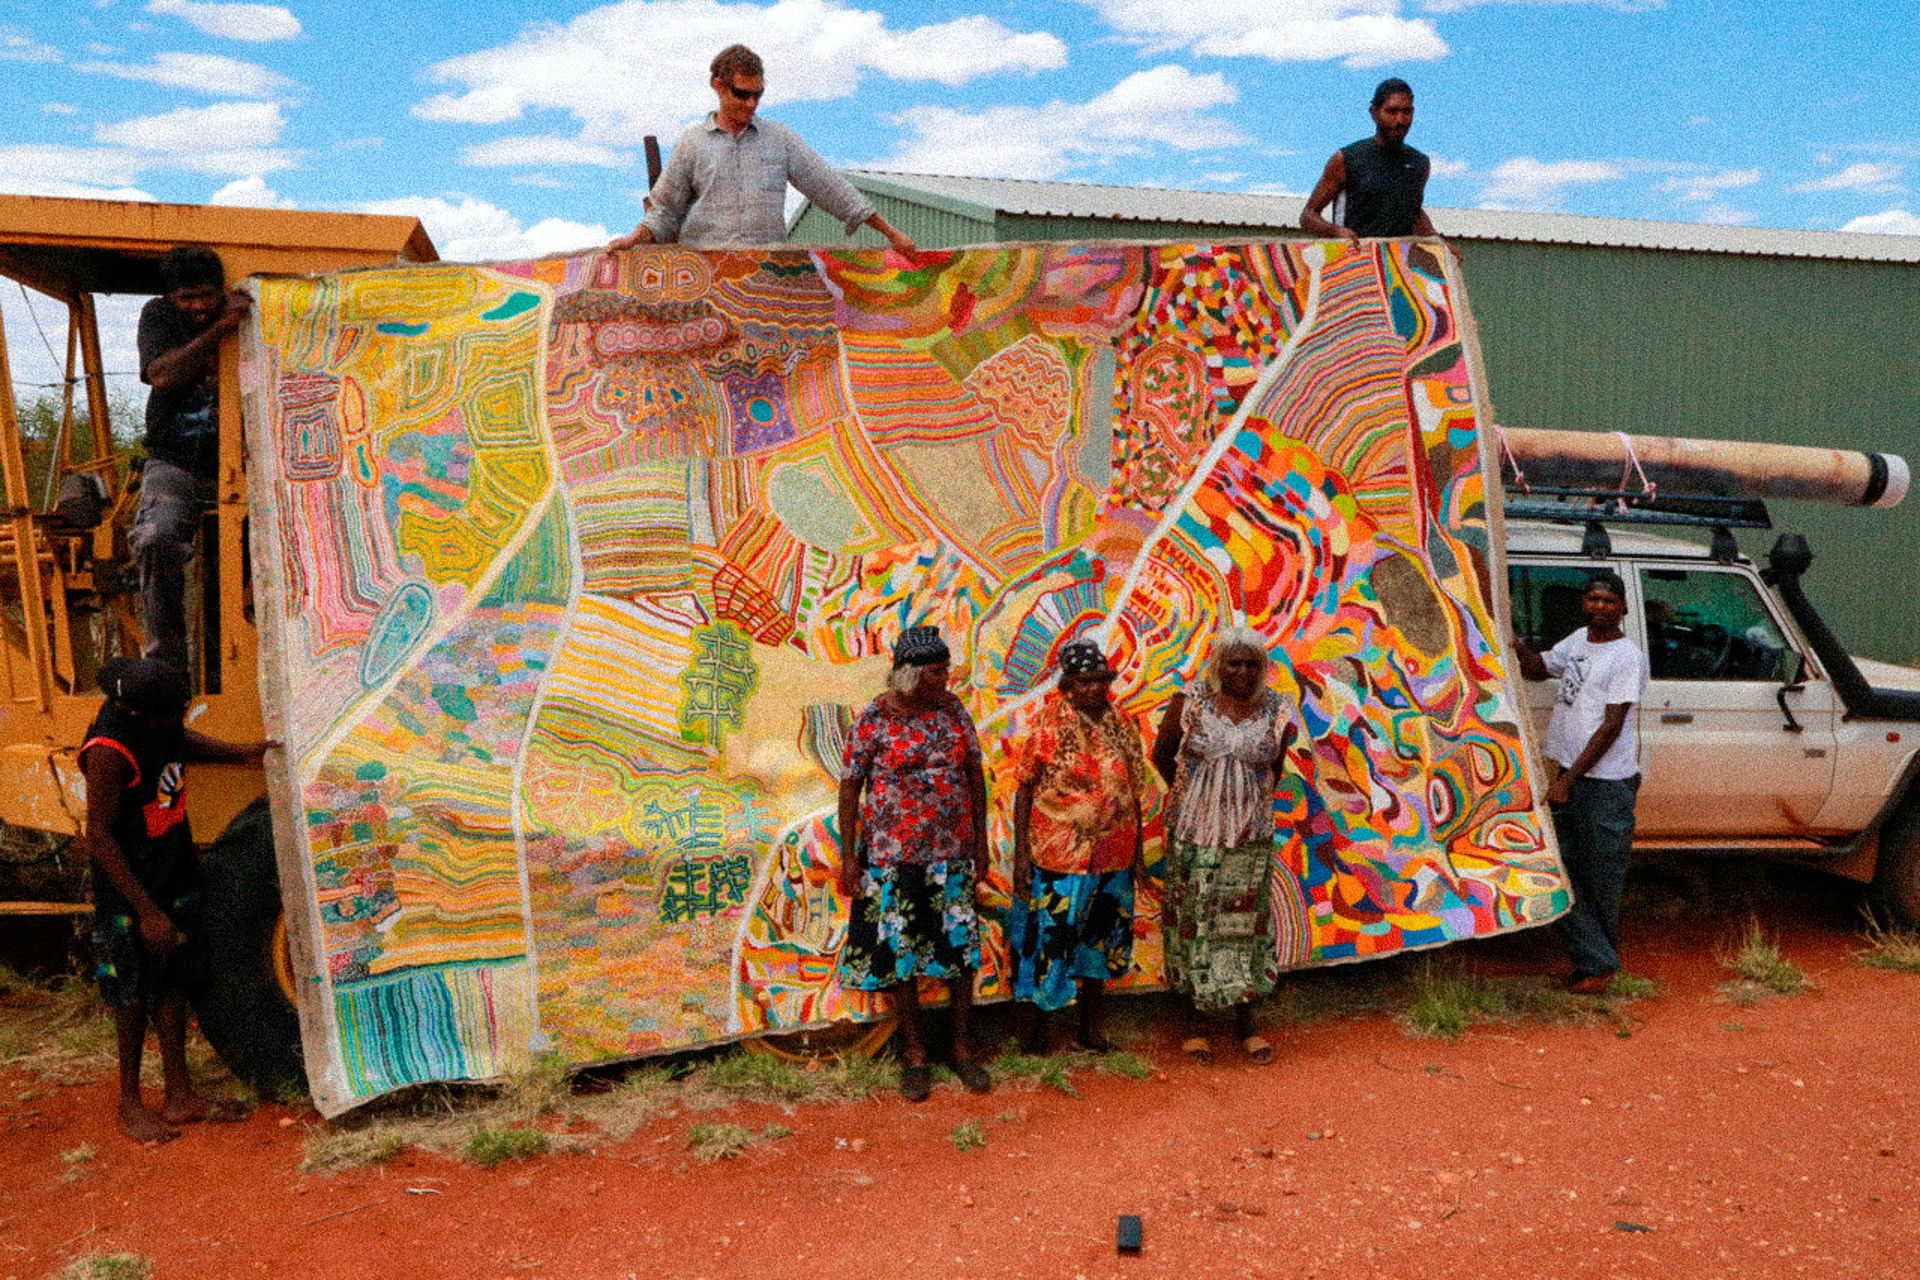 The artists in front of the key visual, a hugely scaled map of the Australian continent 